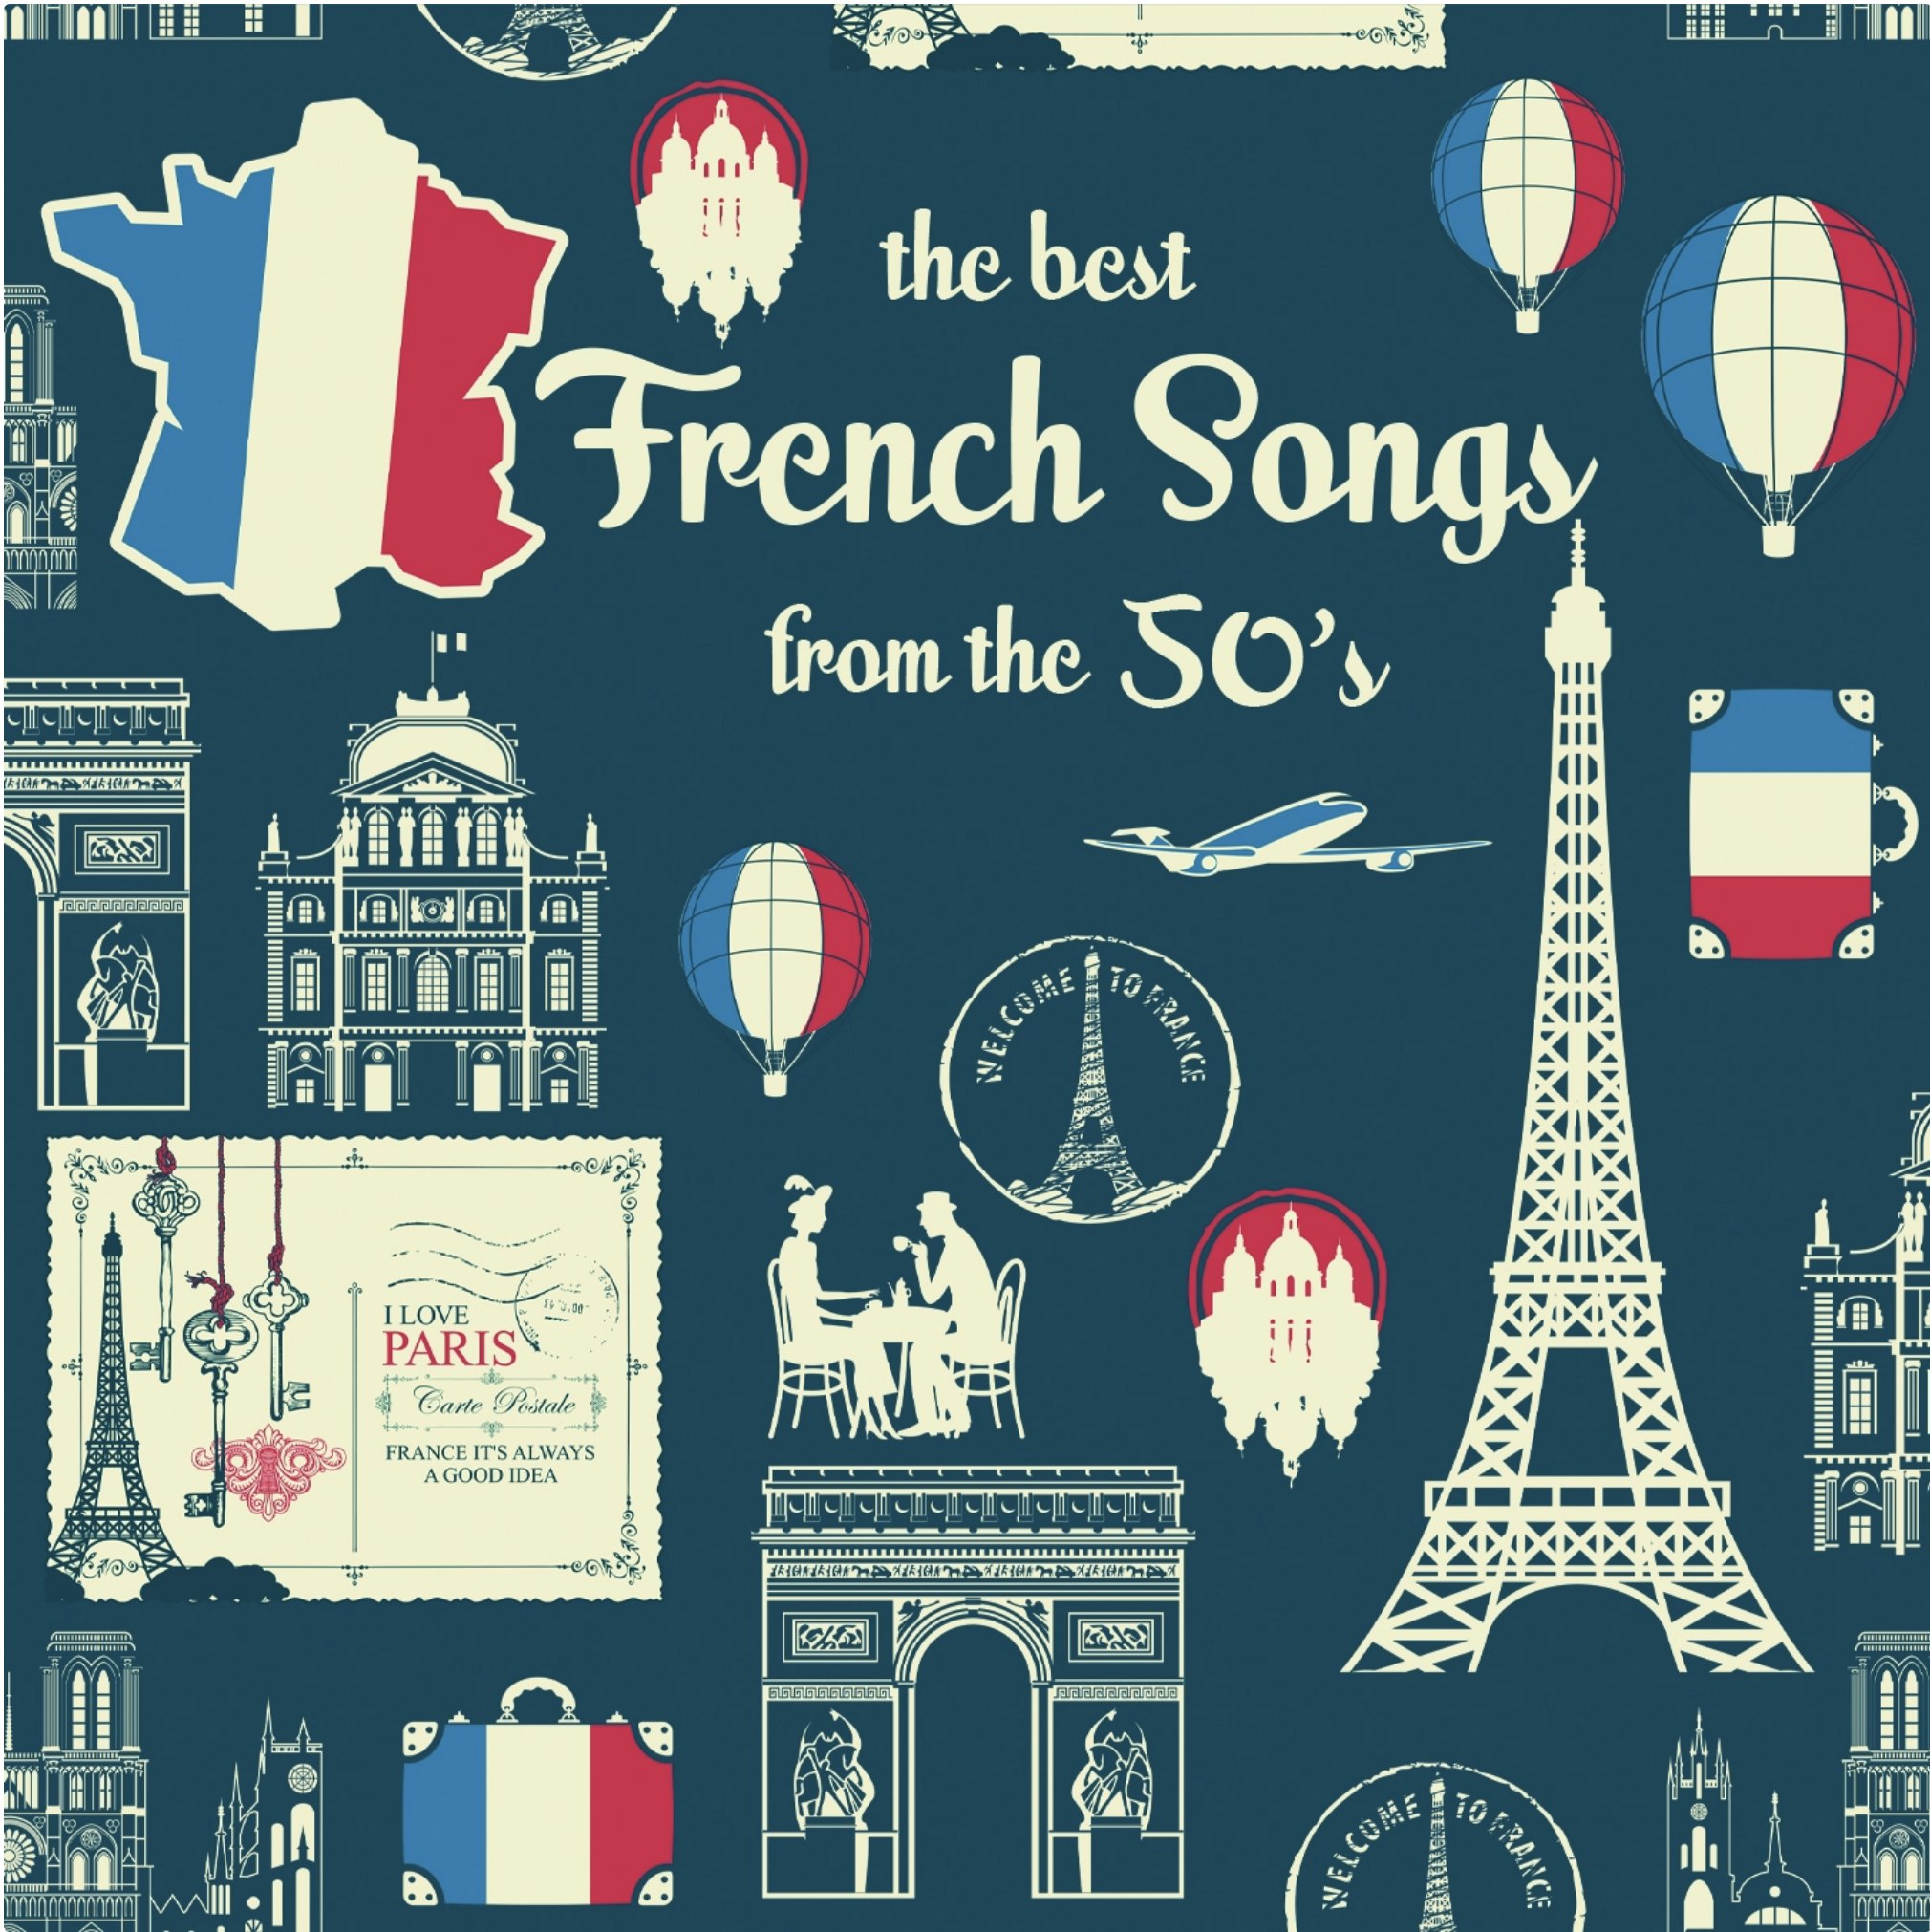 The Best French Songs from the 50s